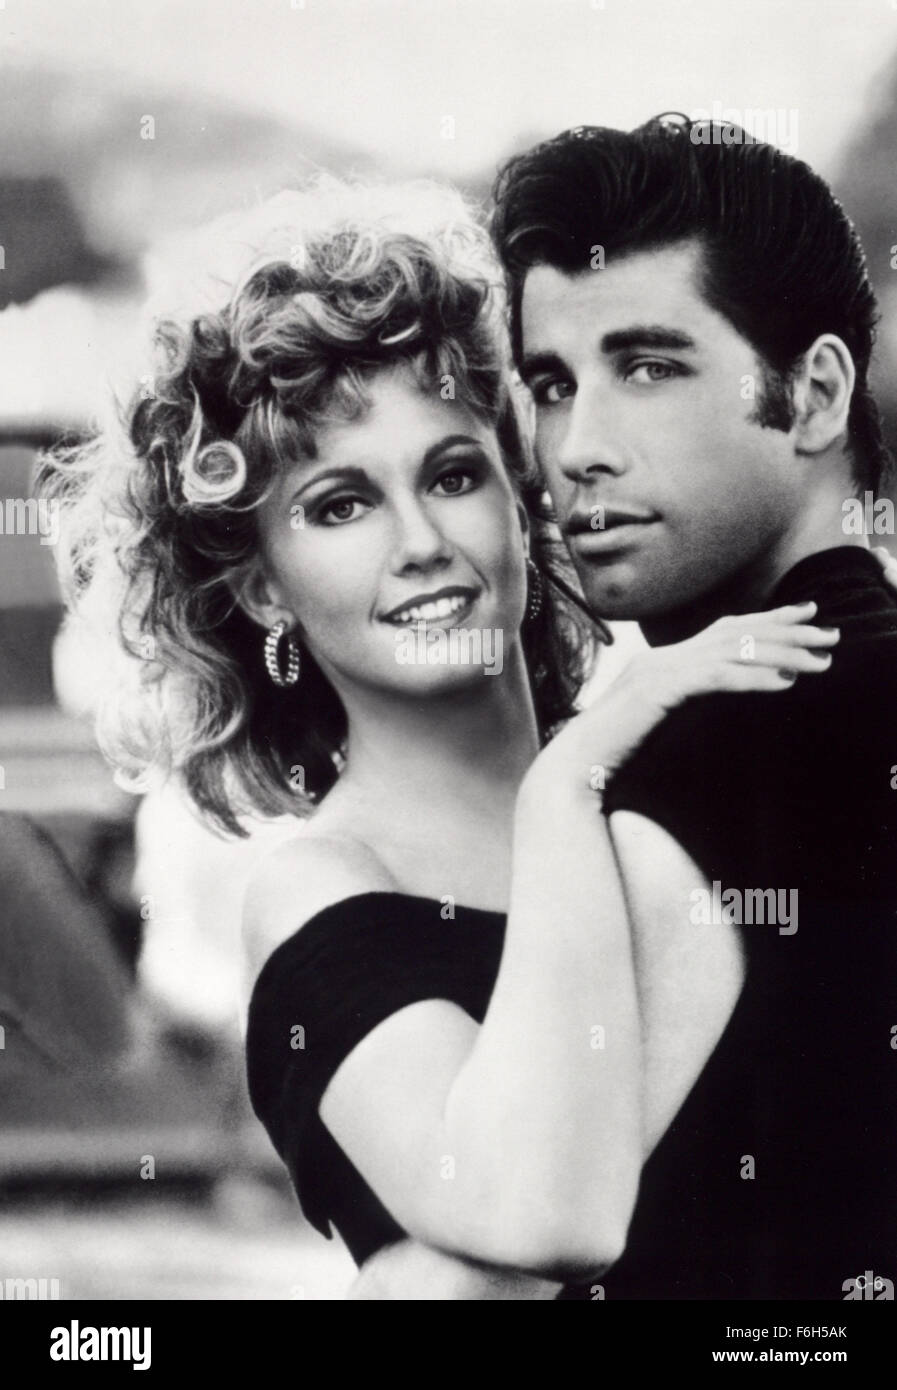 RELEASE DATE: June 16, 1978. MOVIE TITLE: Grease. STUDIO: Paramount Pictures. PLOT: Good girl Sandy and greaser Danny fell in love over the summer. But when they unexpectedly discover they're now in the same high school, will they be able to rekindle their romance?  PICTURED: OLIVIA NEWTON-JOHN as Sandy & JOHN TRAVOLTA as Danny. Stock Photo